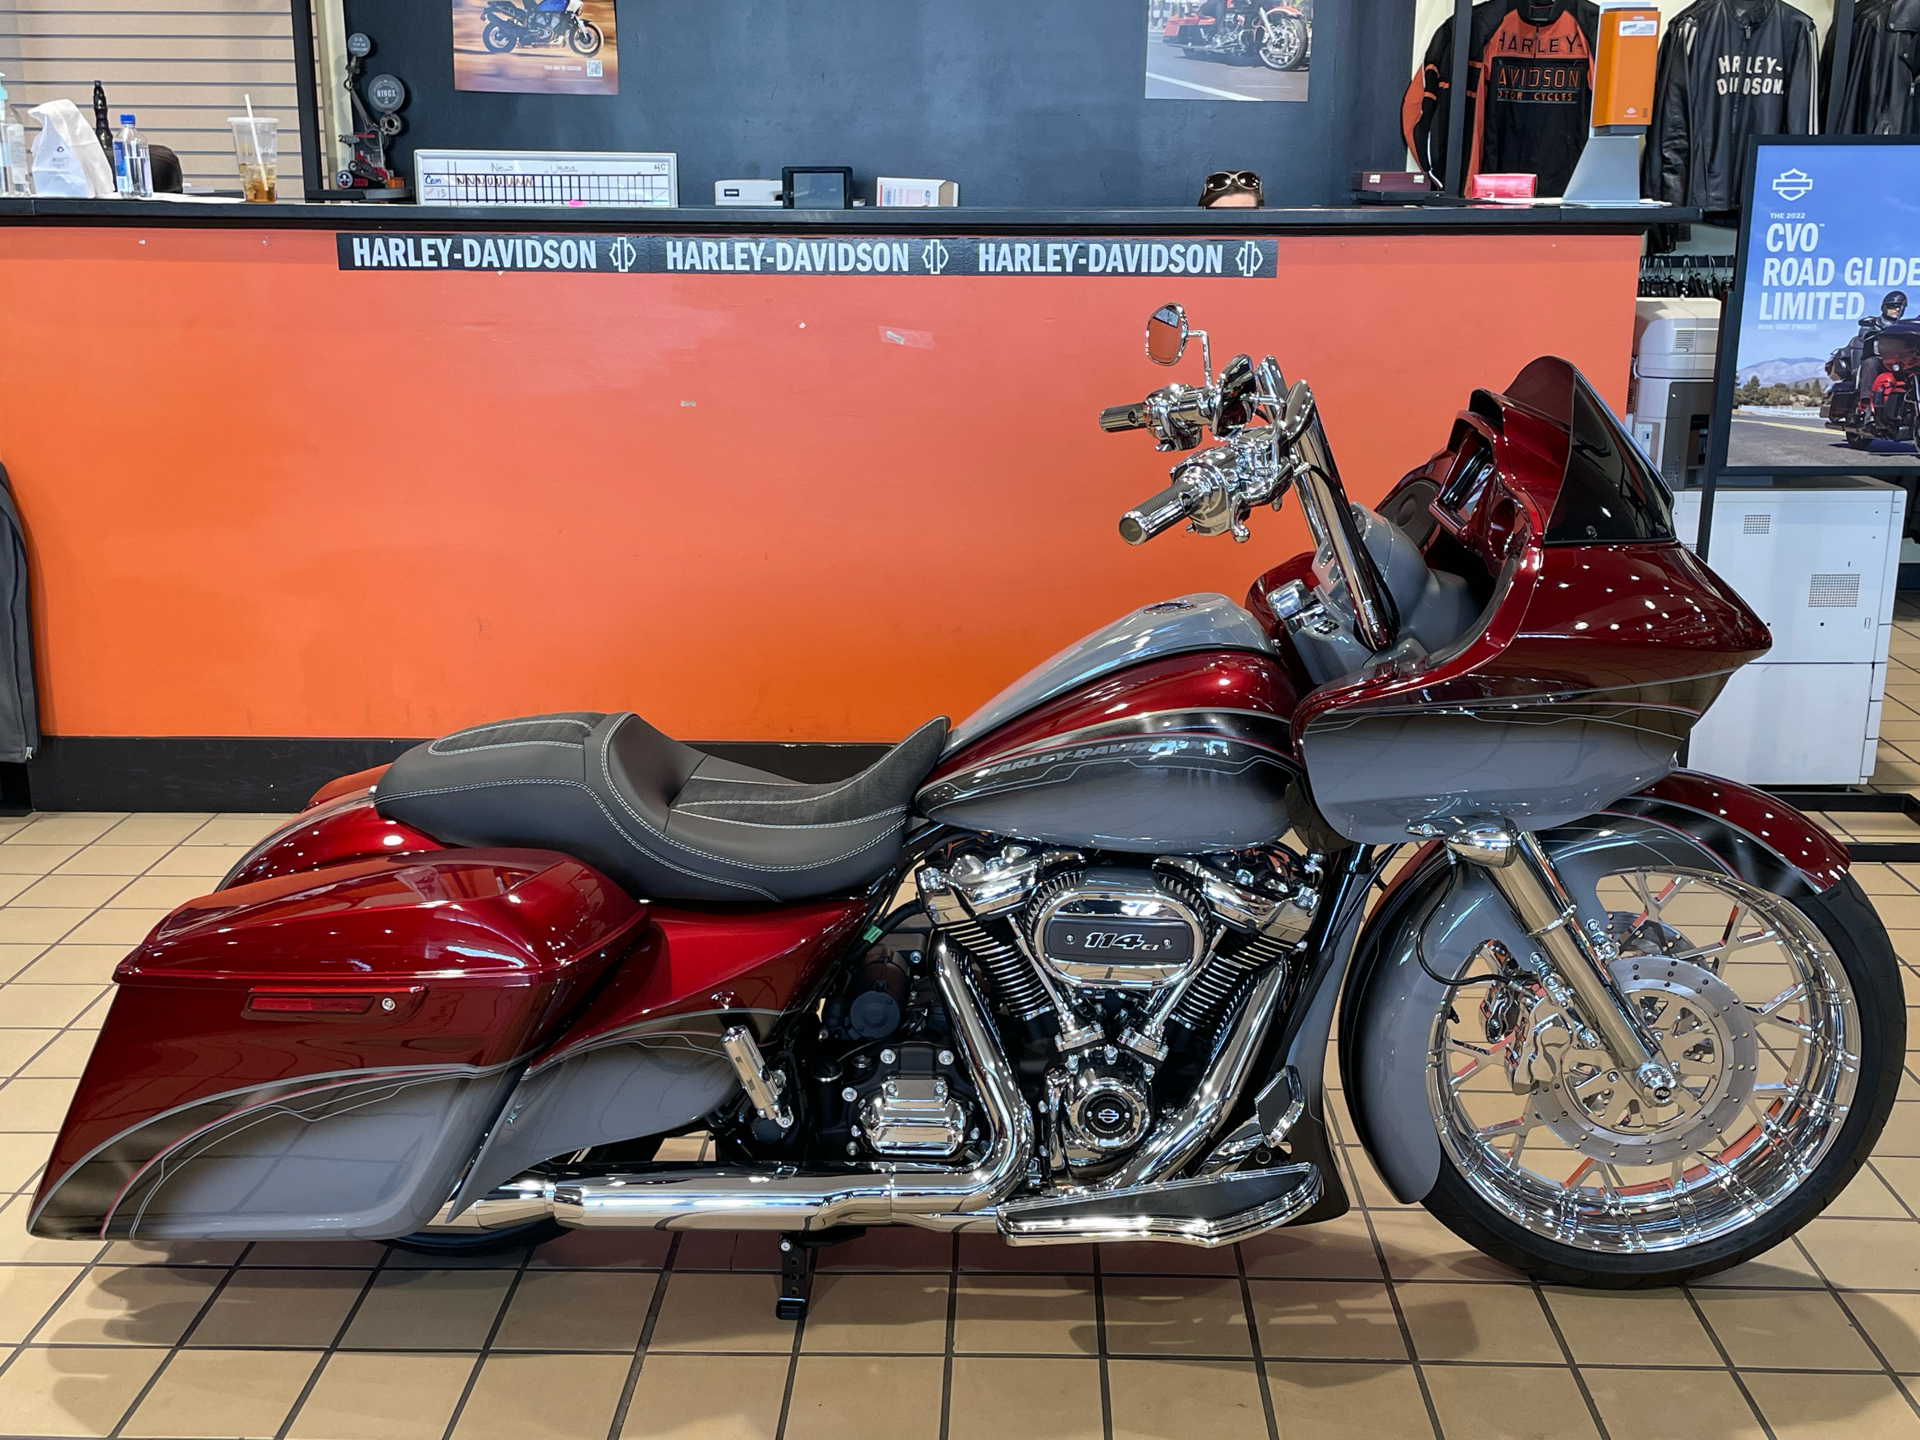 2021 Harley-Davidson Road Glide® Special in Dumfries, Virginia - Photo 16